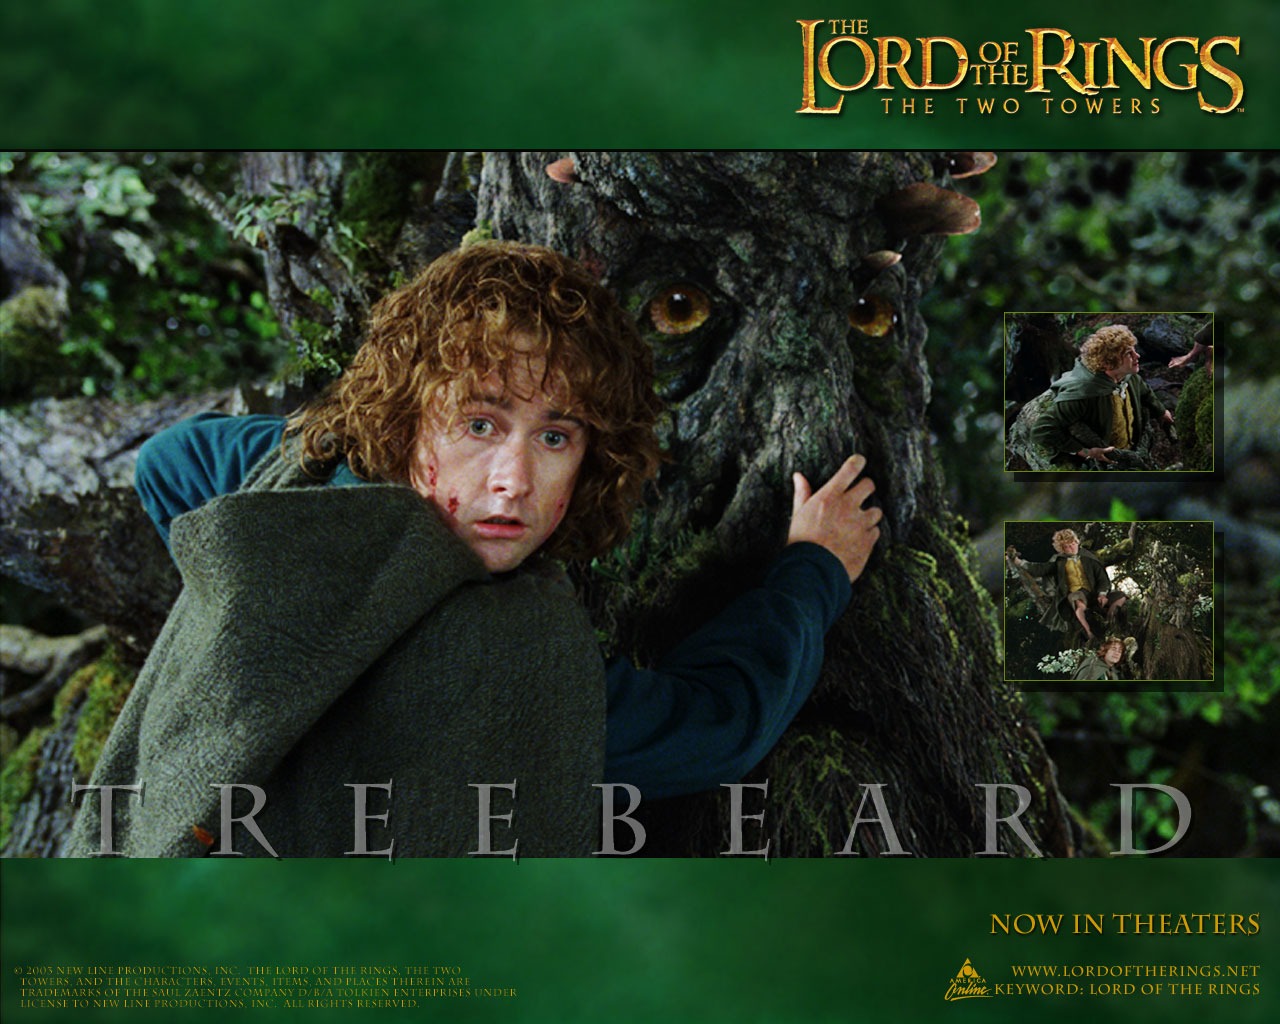 The Lord of the Rings wallpaper #12 - 1280x1024